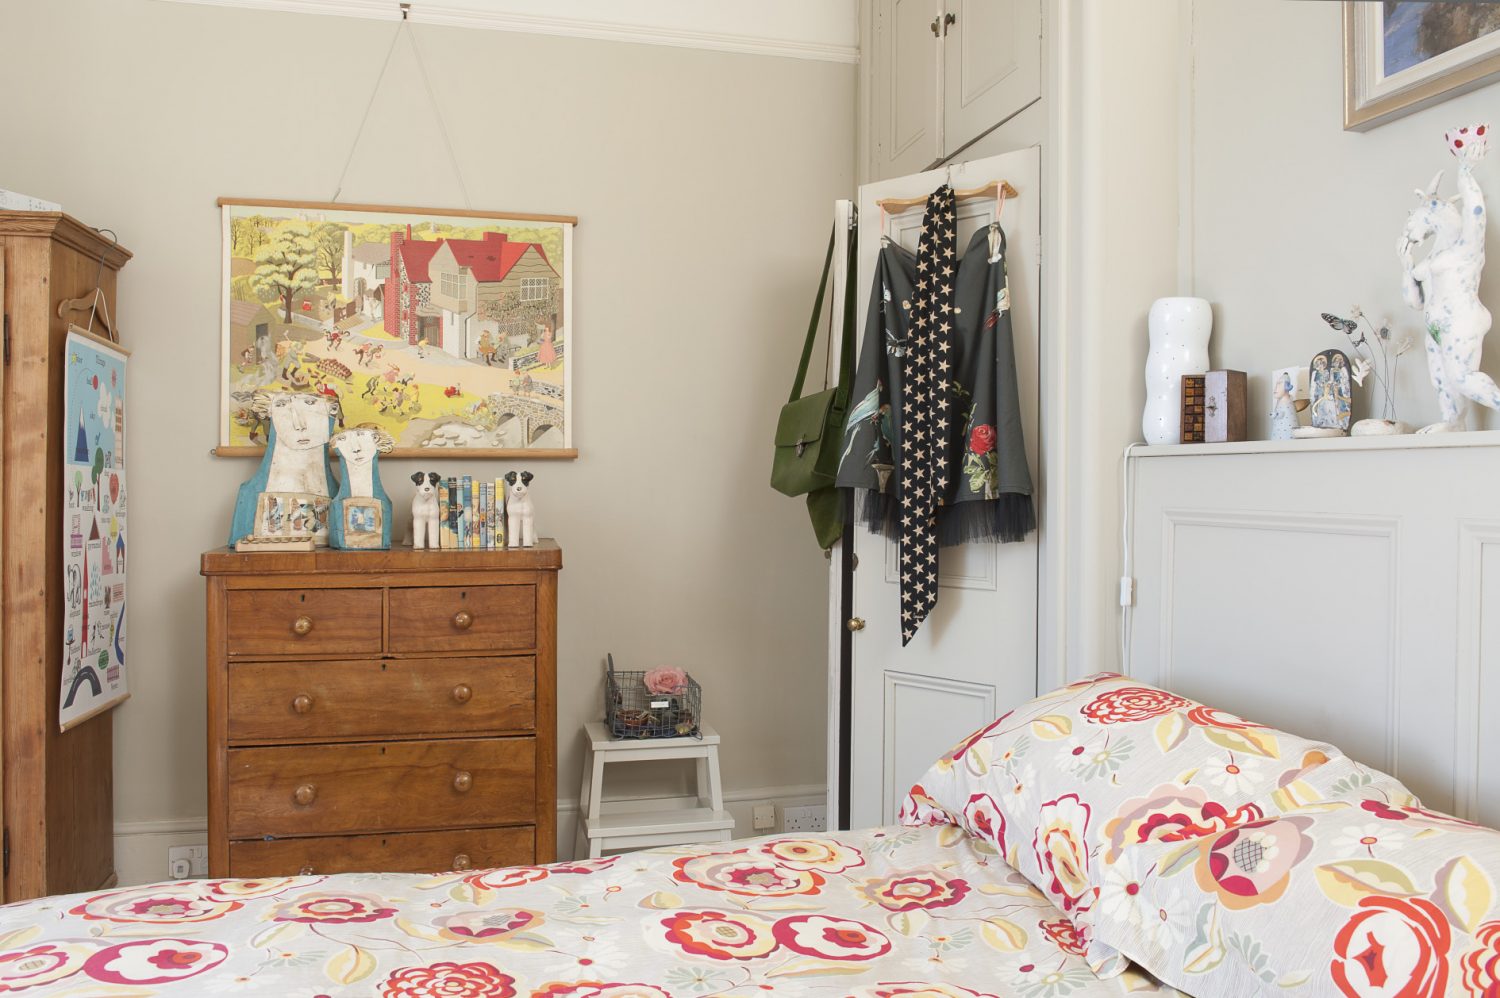 The bed in the master bedroom is dressed with bright, Collier Campbell bedlinen featuring a zinnia-like floral pattern